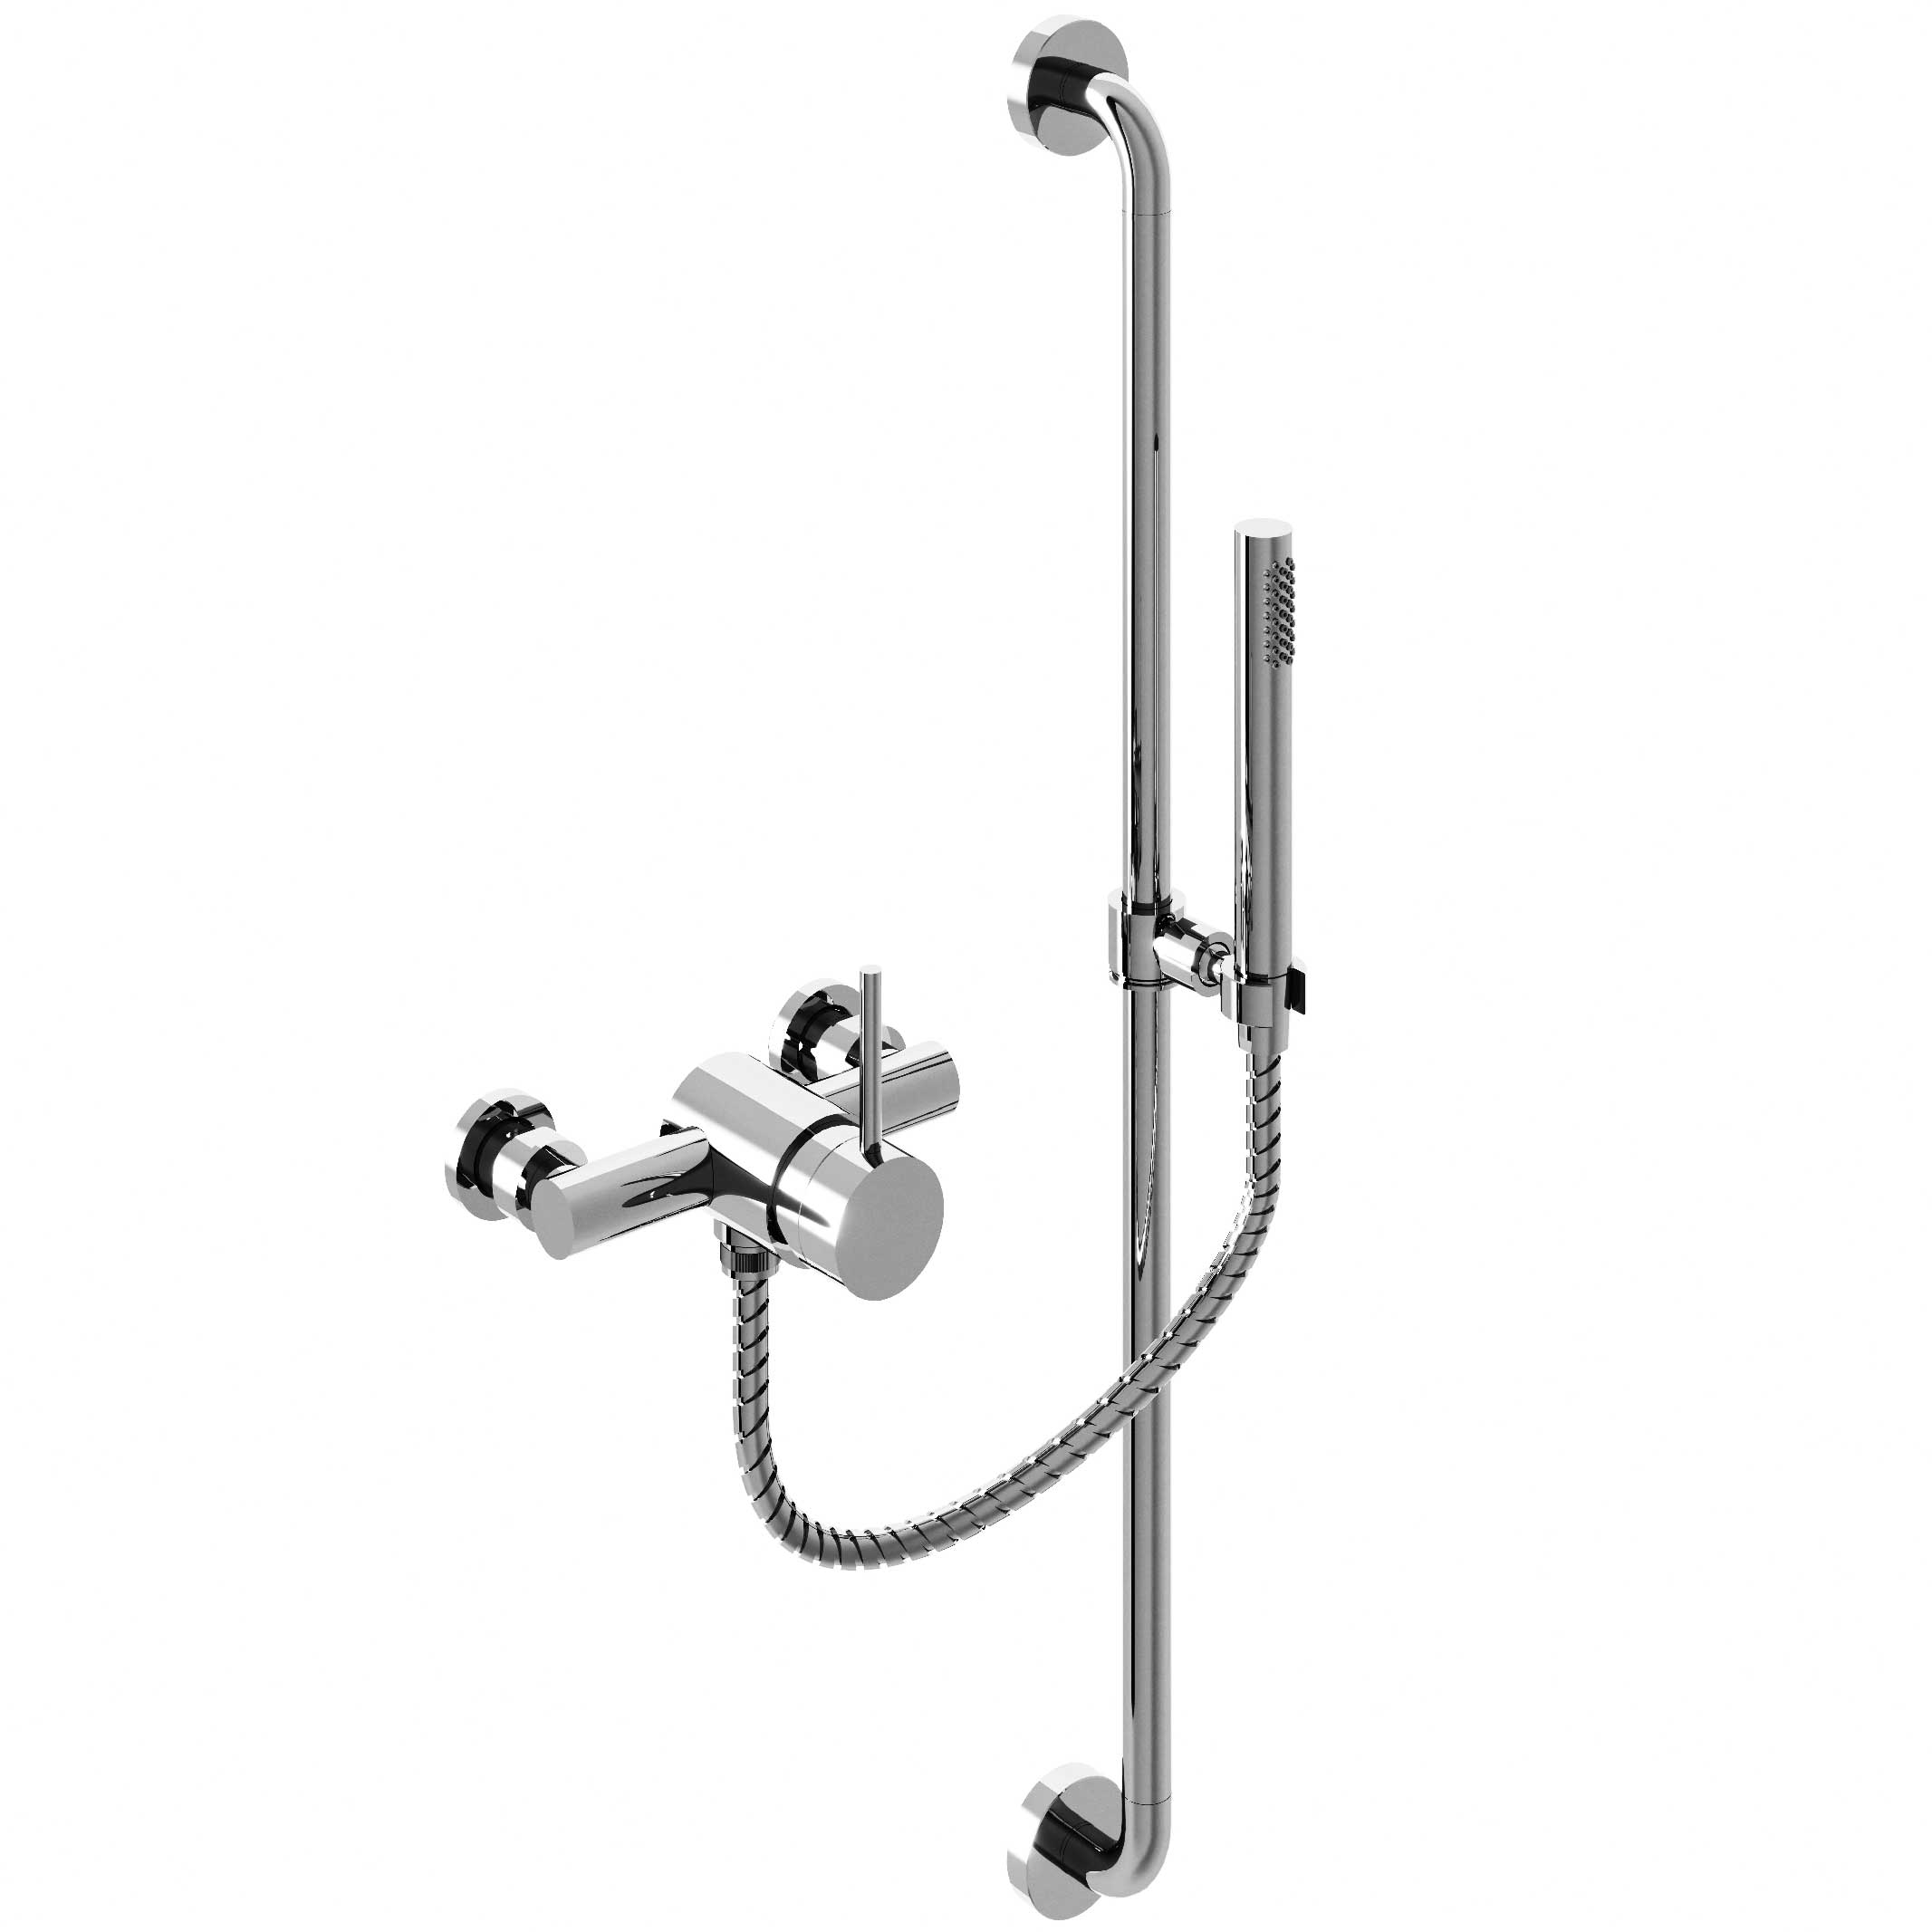 M91-2202M Single-lever shower mixer with sliding bar